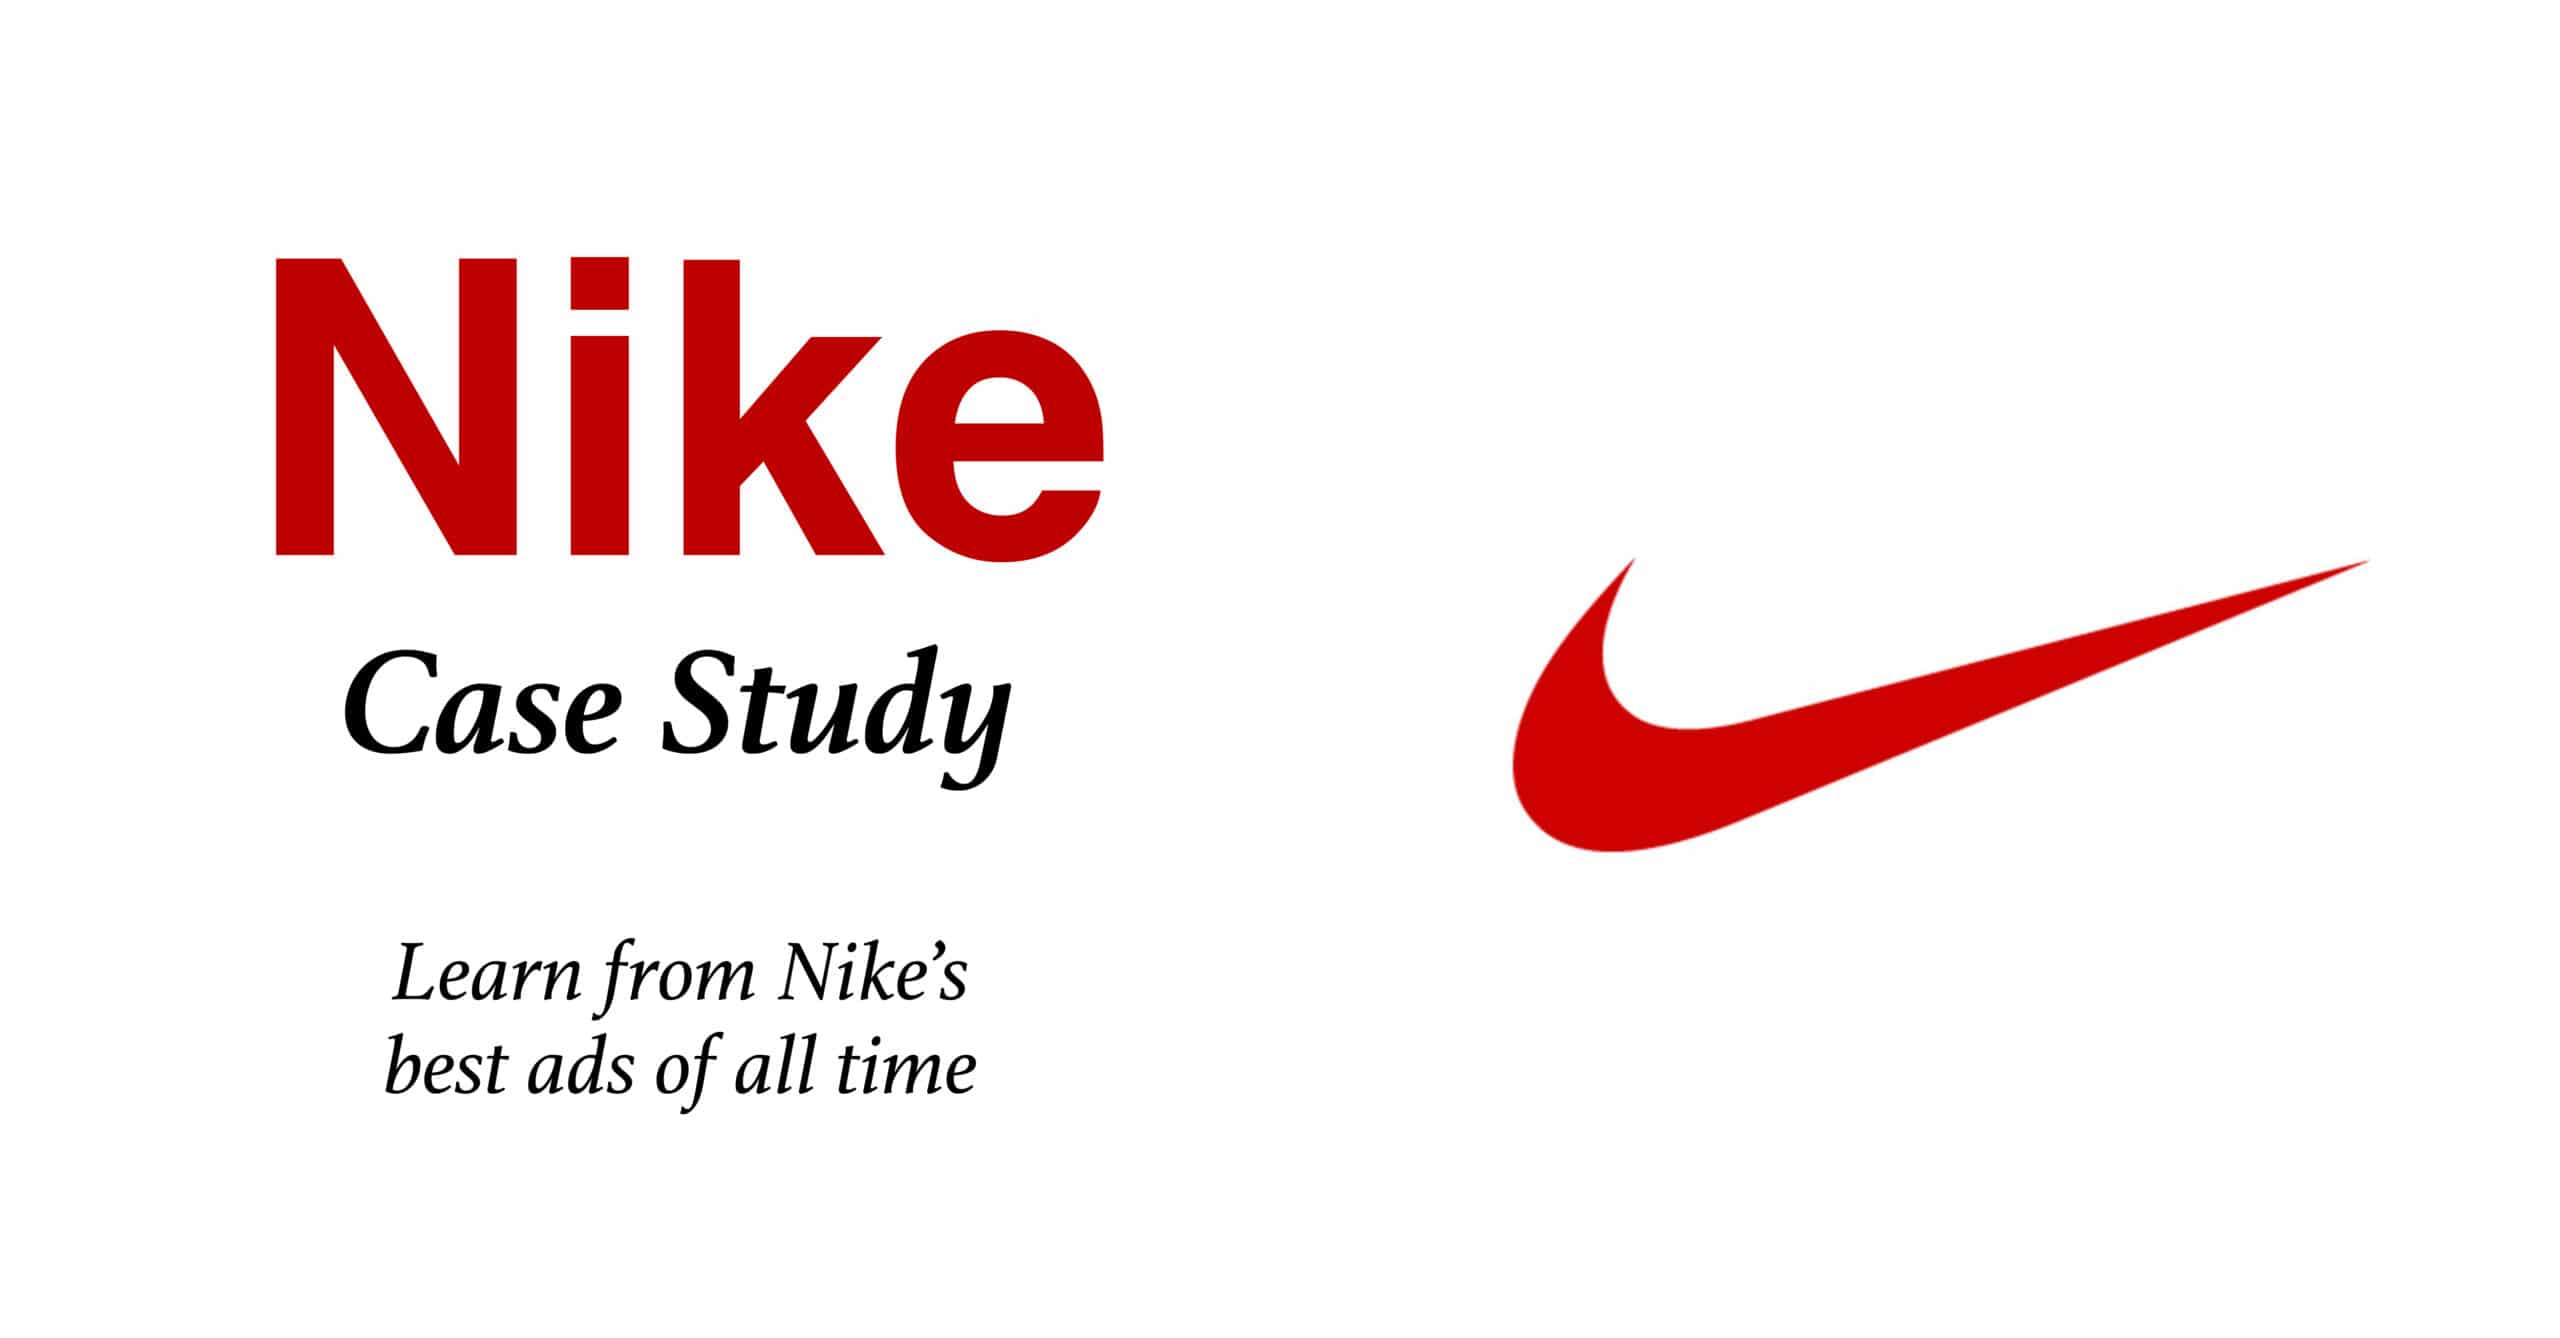 Susceptibles a Formación Elemental Nike case study: Get inspired by the best Nike ads of all time